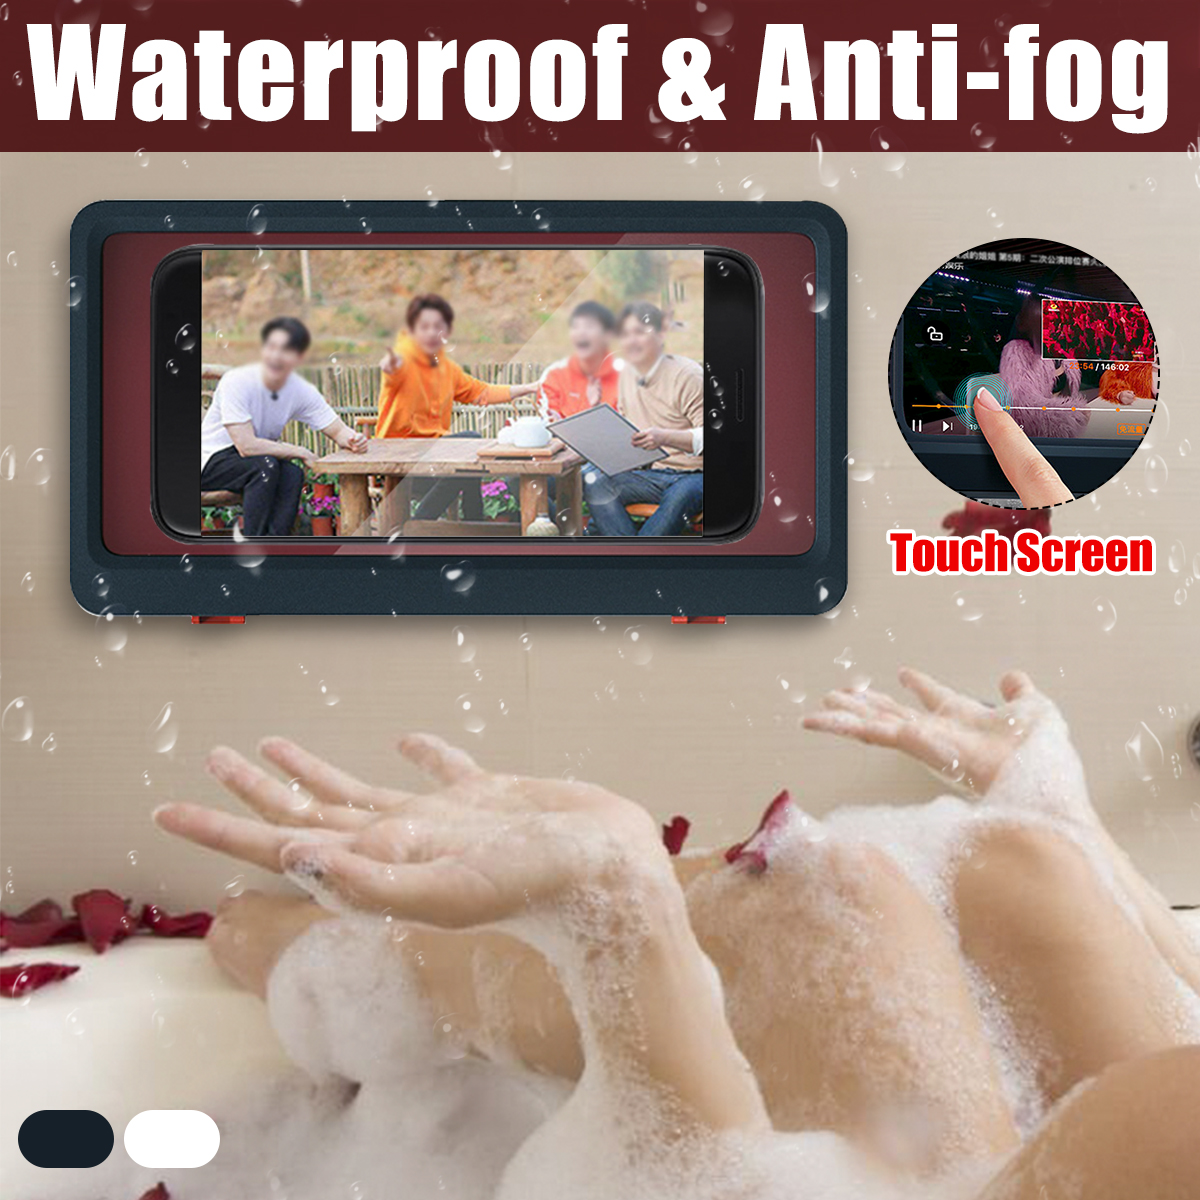 Bathroom-Waterproof-Touch-Screen-Mobile-Cell-Phone-Holder-Case-Wall-Mount-Storage-Box-Under-68-inche-1750862-1